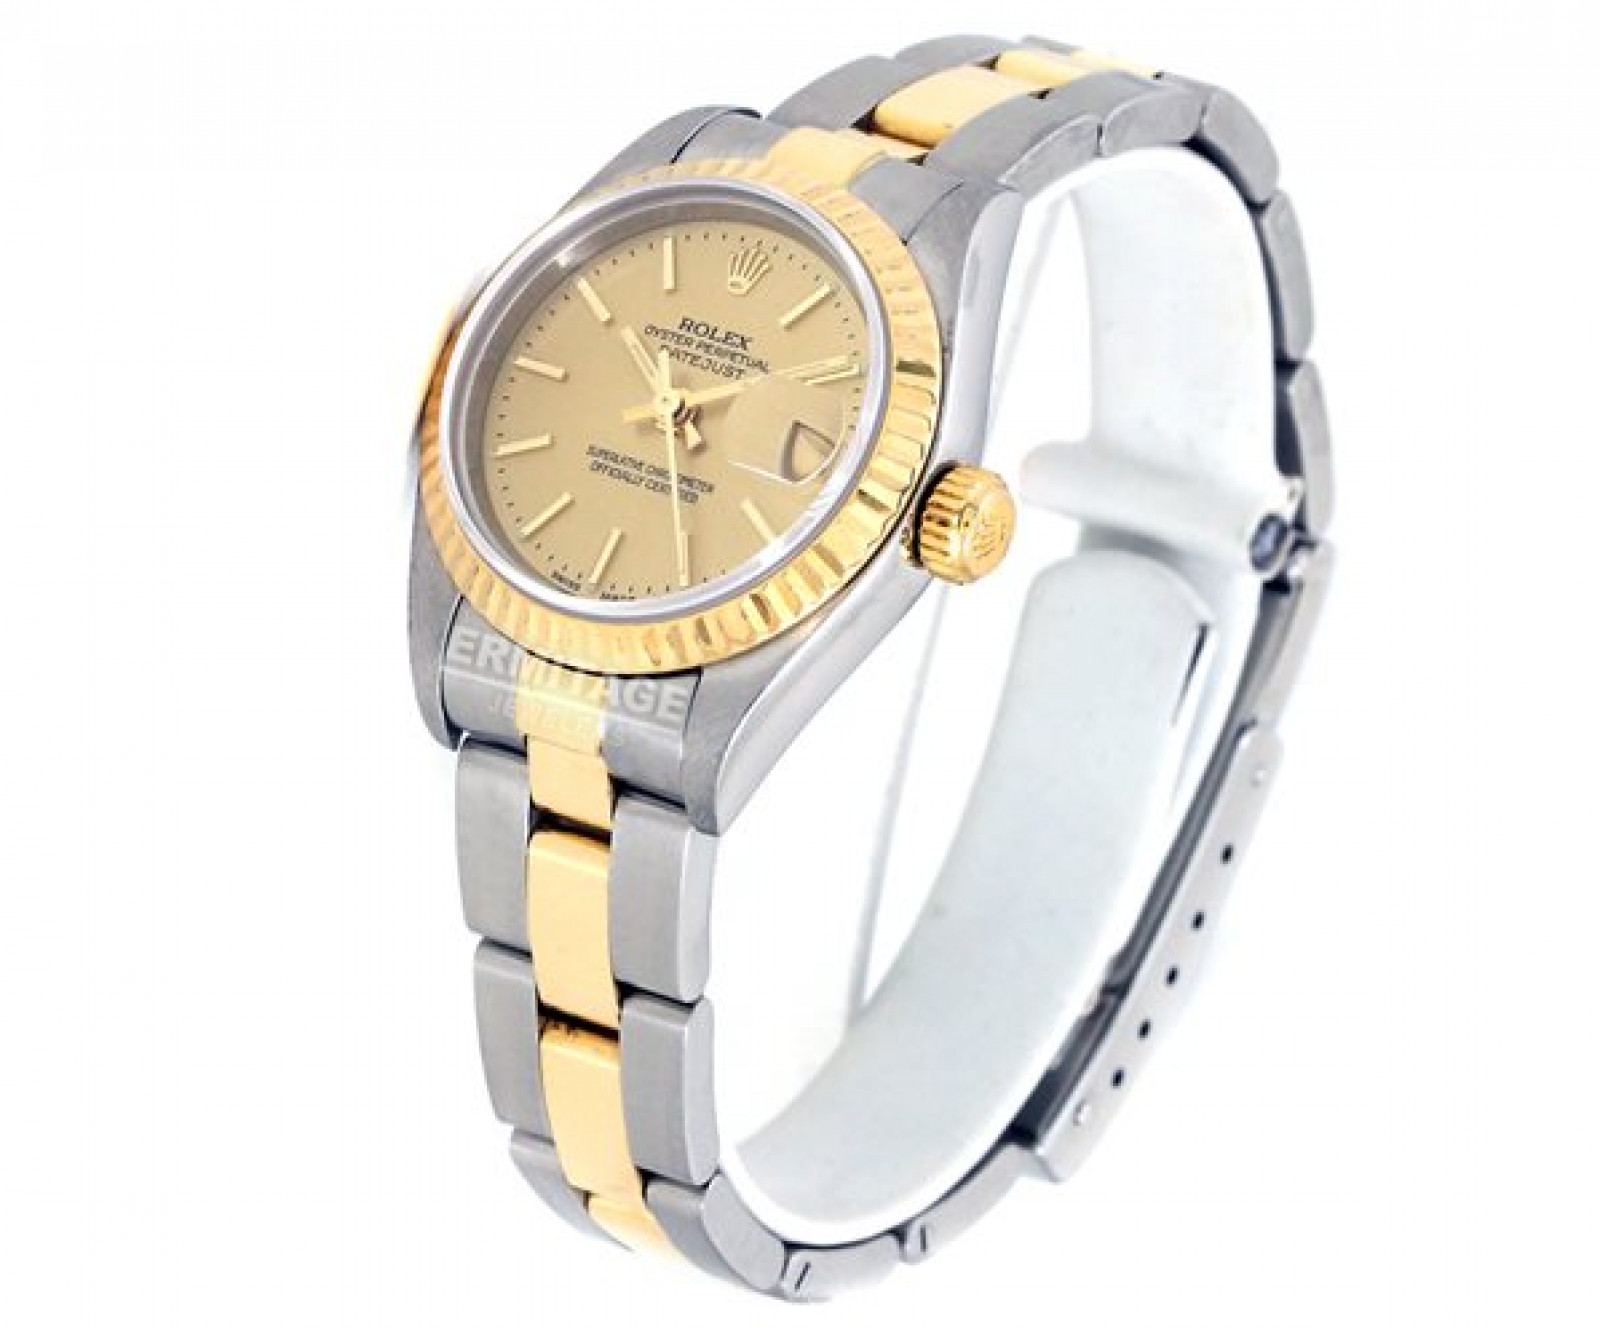 Ladies Rolex Datejust 79173 with Oyster Bracelet